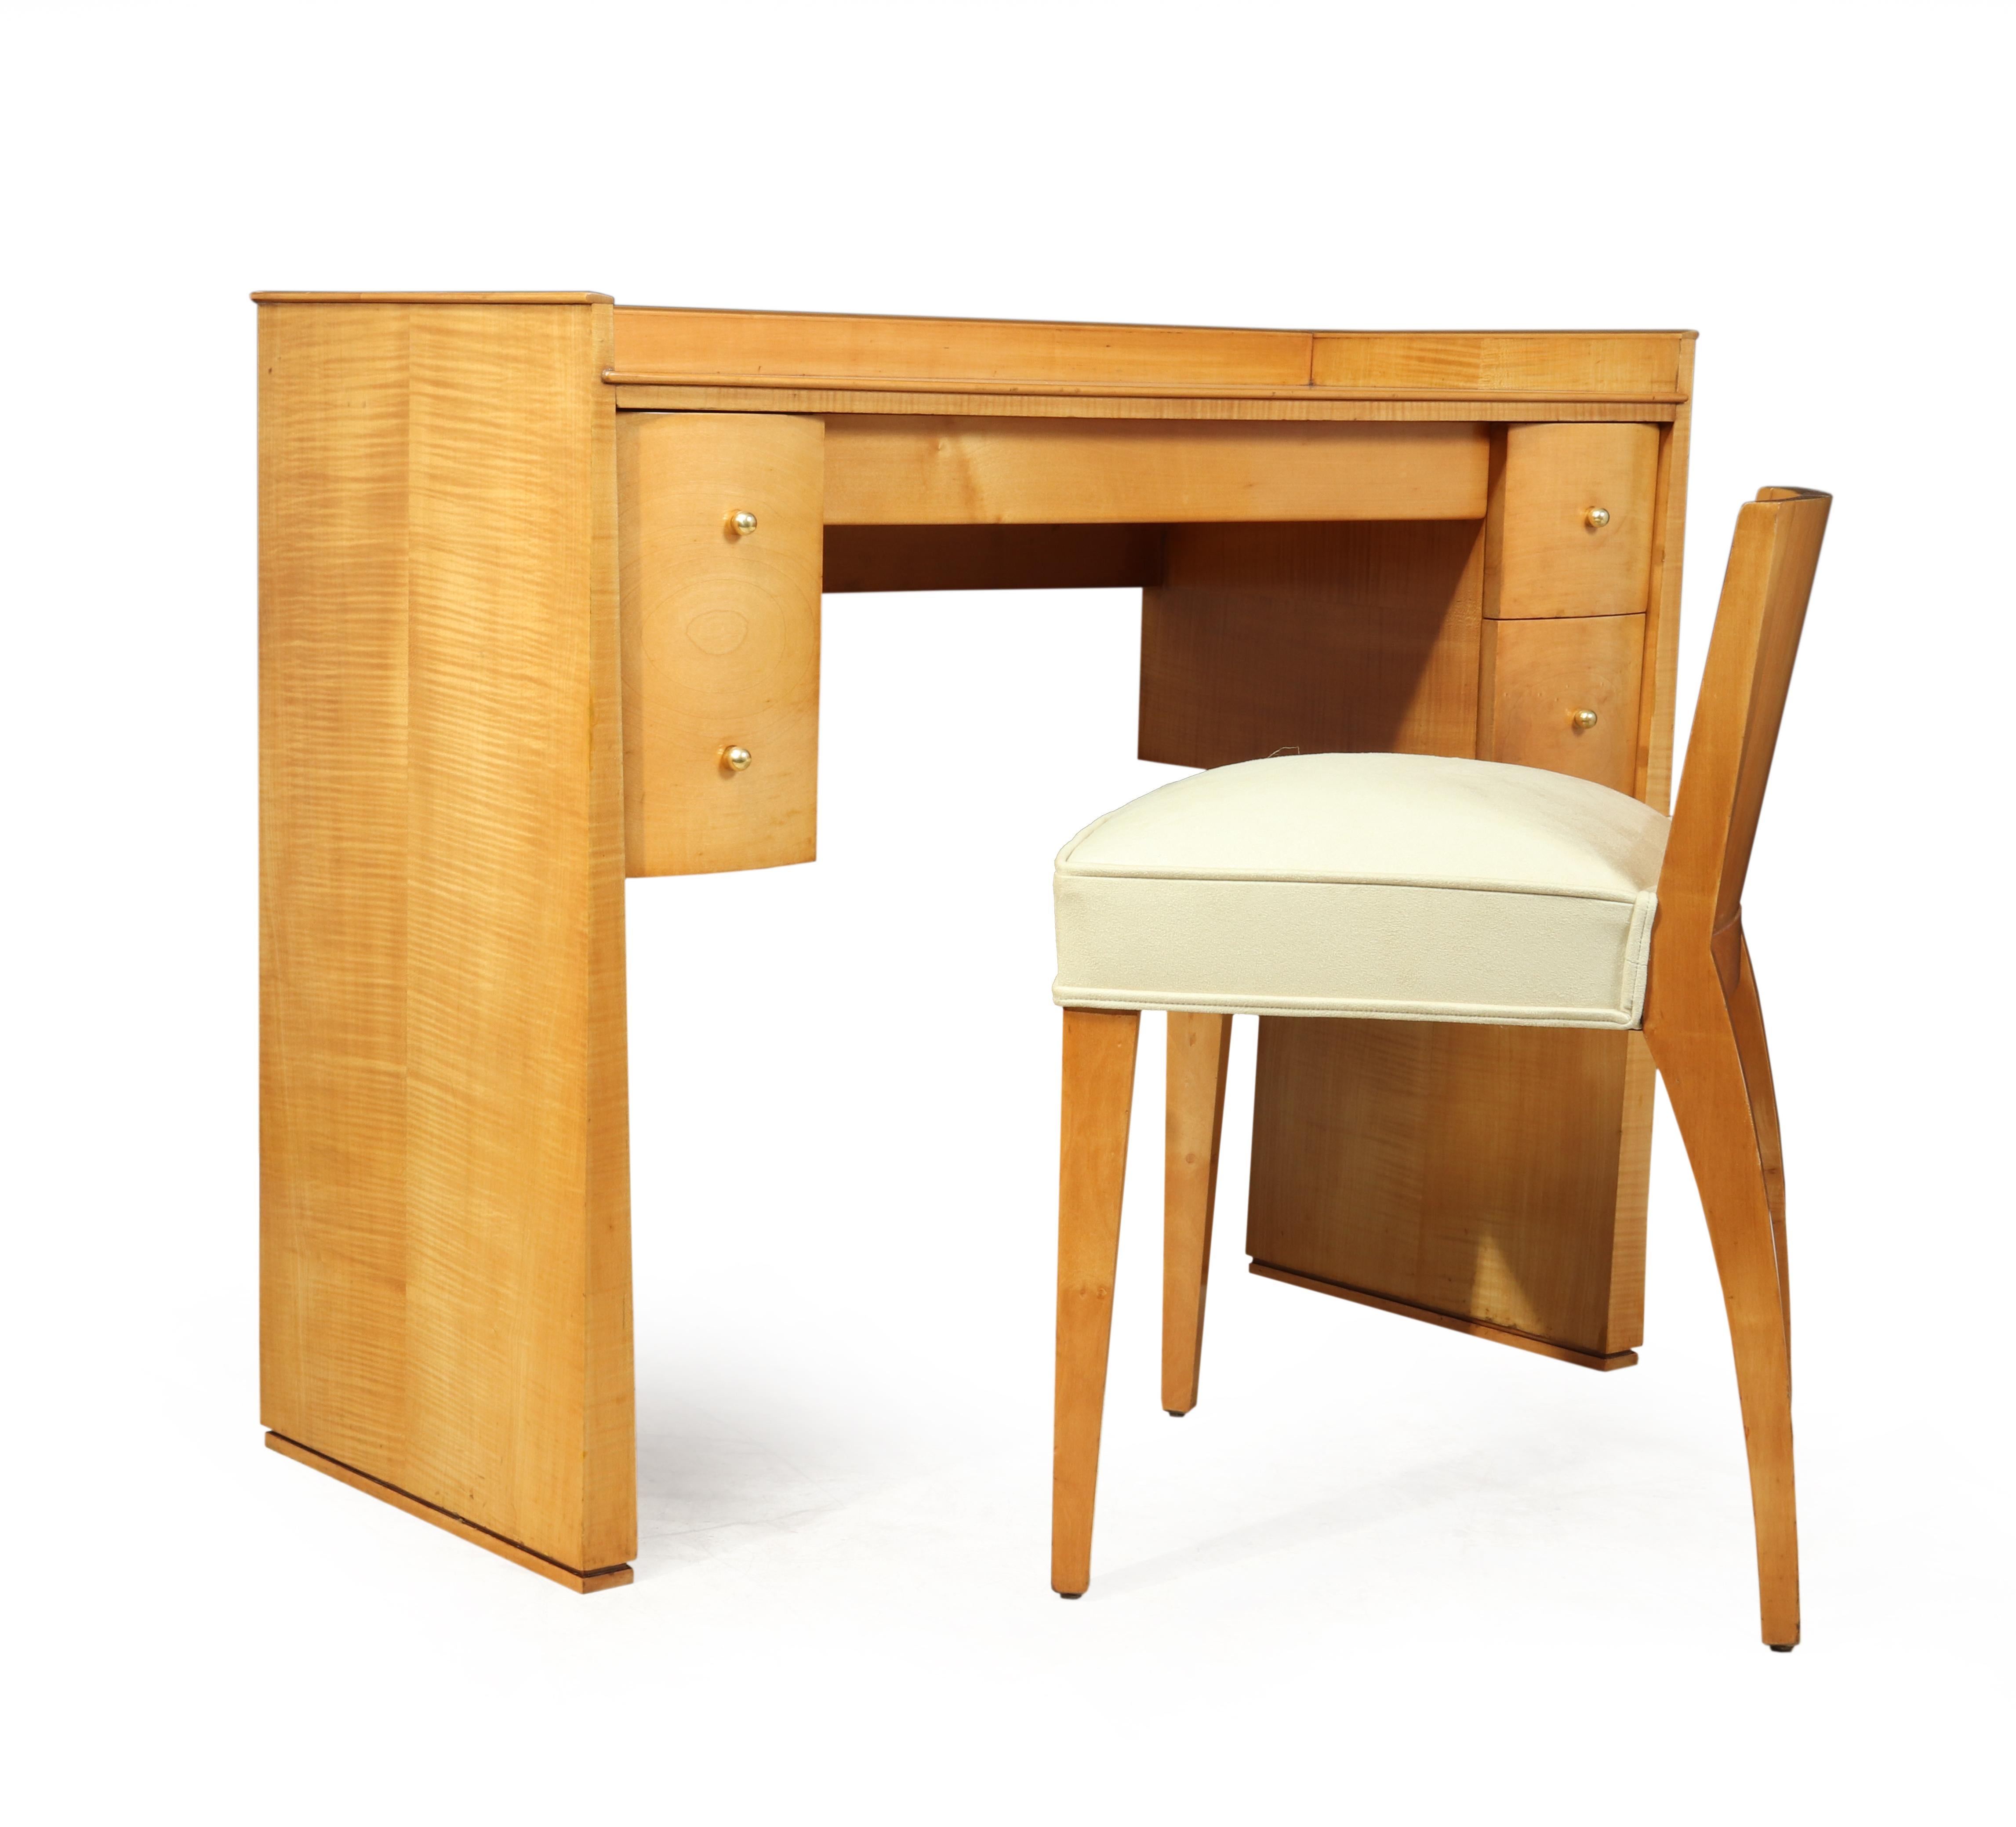 A French Art Deco Sycamore dressing table and chair

This sycamore dressing table has a raised gallery around the top, a double deep drawer on the left central drawer and two drawers to the right, the side are tapered and stand on intricate slides